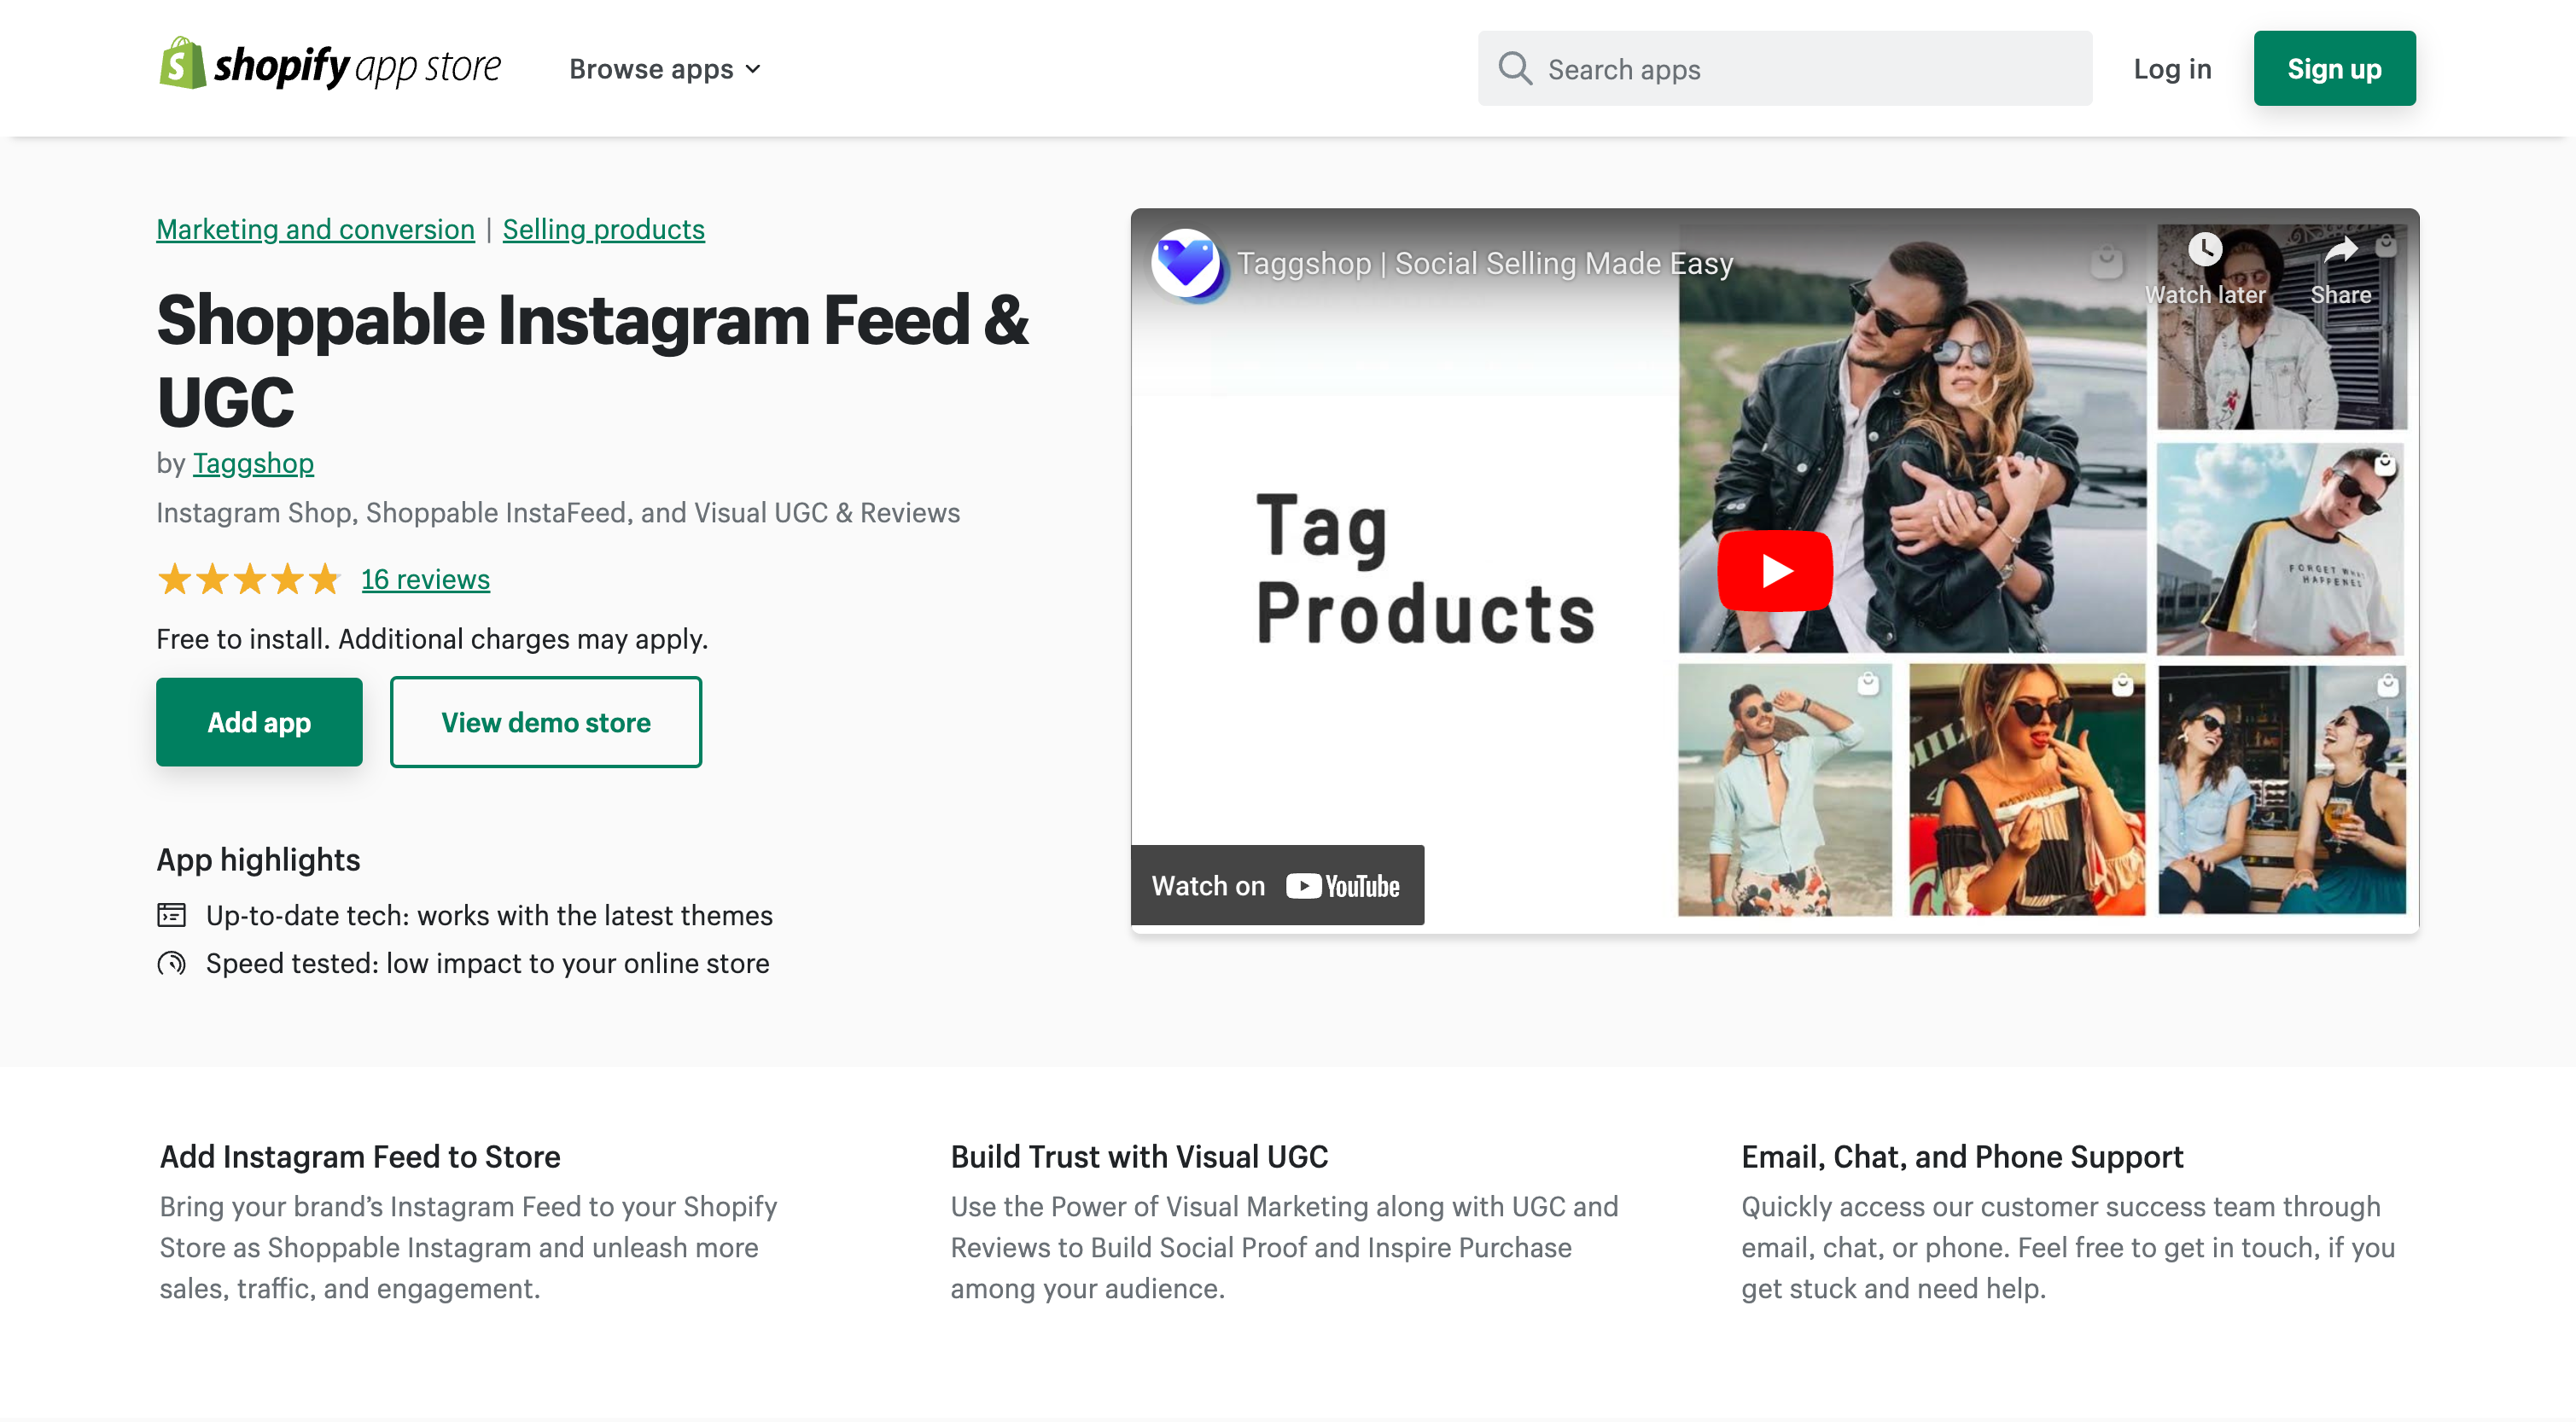 Shoppable Instagram Feed & UGC - Instagram Shop, Shoppable InstaFeed, and Visual UGC & Reviews | Shopify App Store